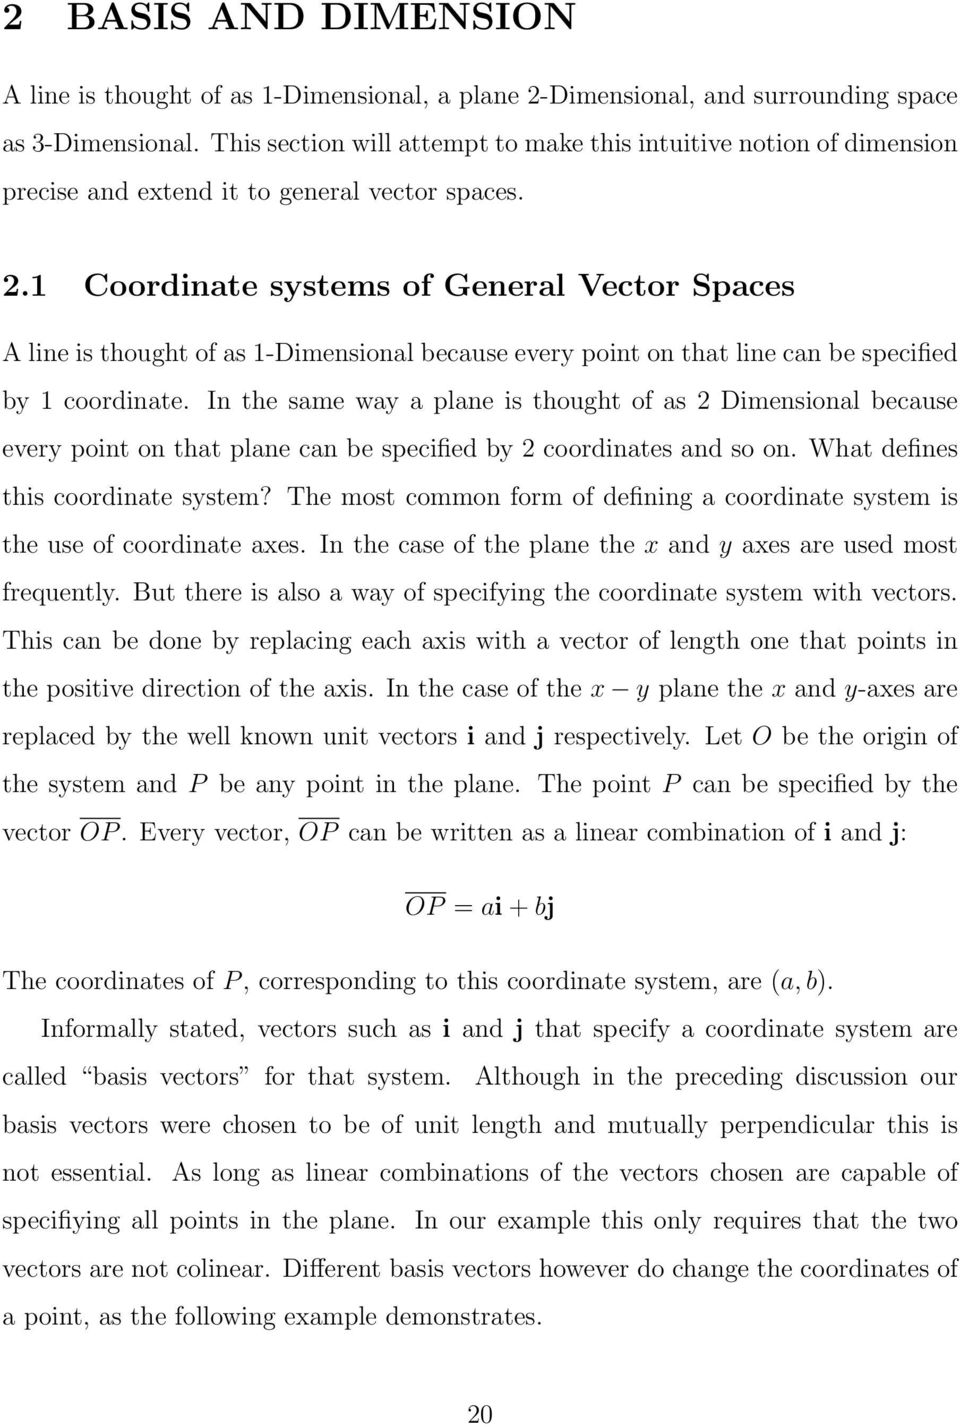 1 Coordinate systems of General Vector Spaces A line is thought of as 1-Dimensional because every point on that line can be specified by 1 coordinate.